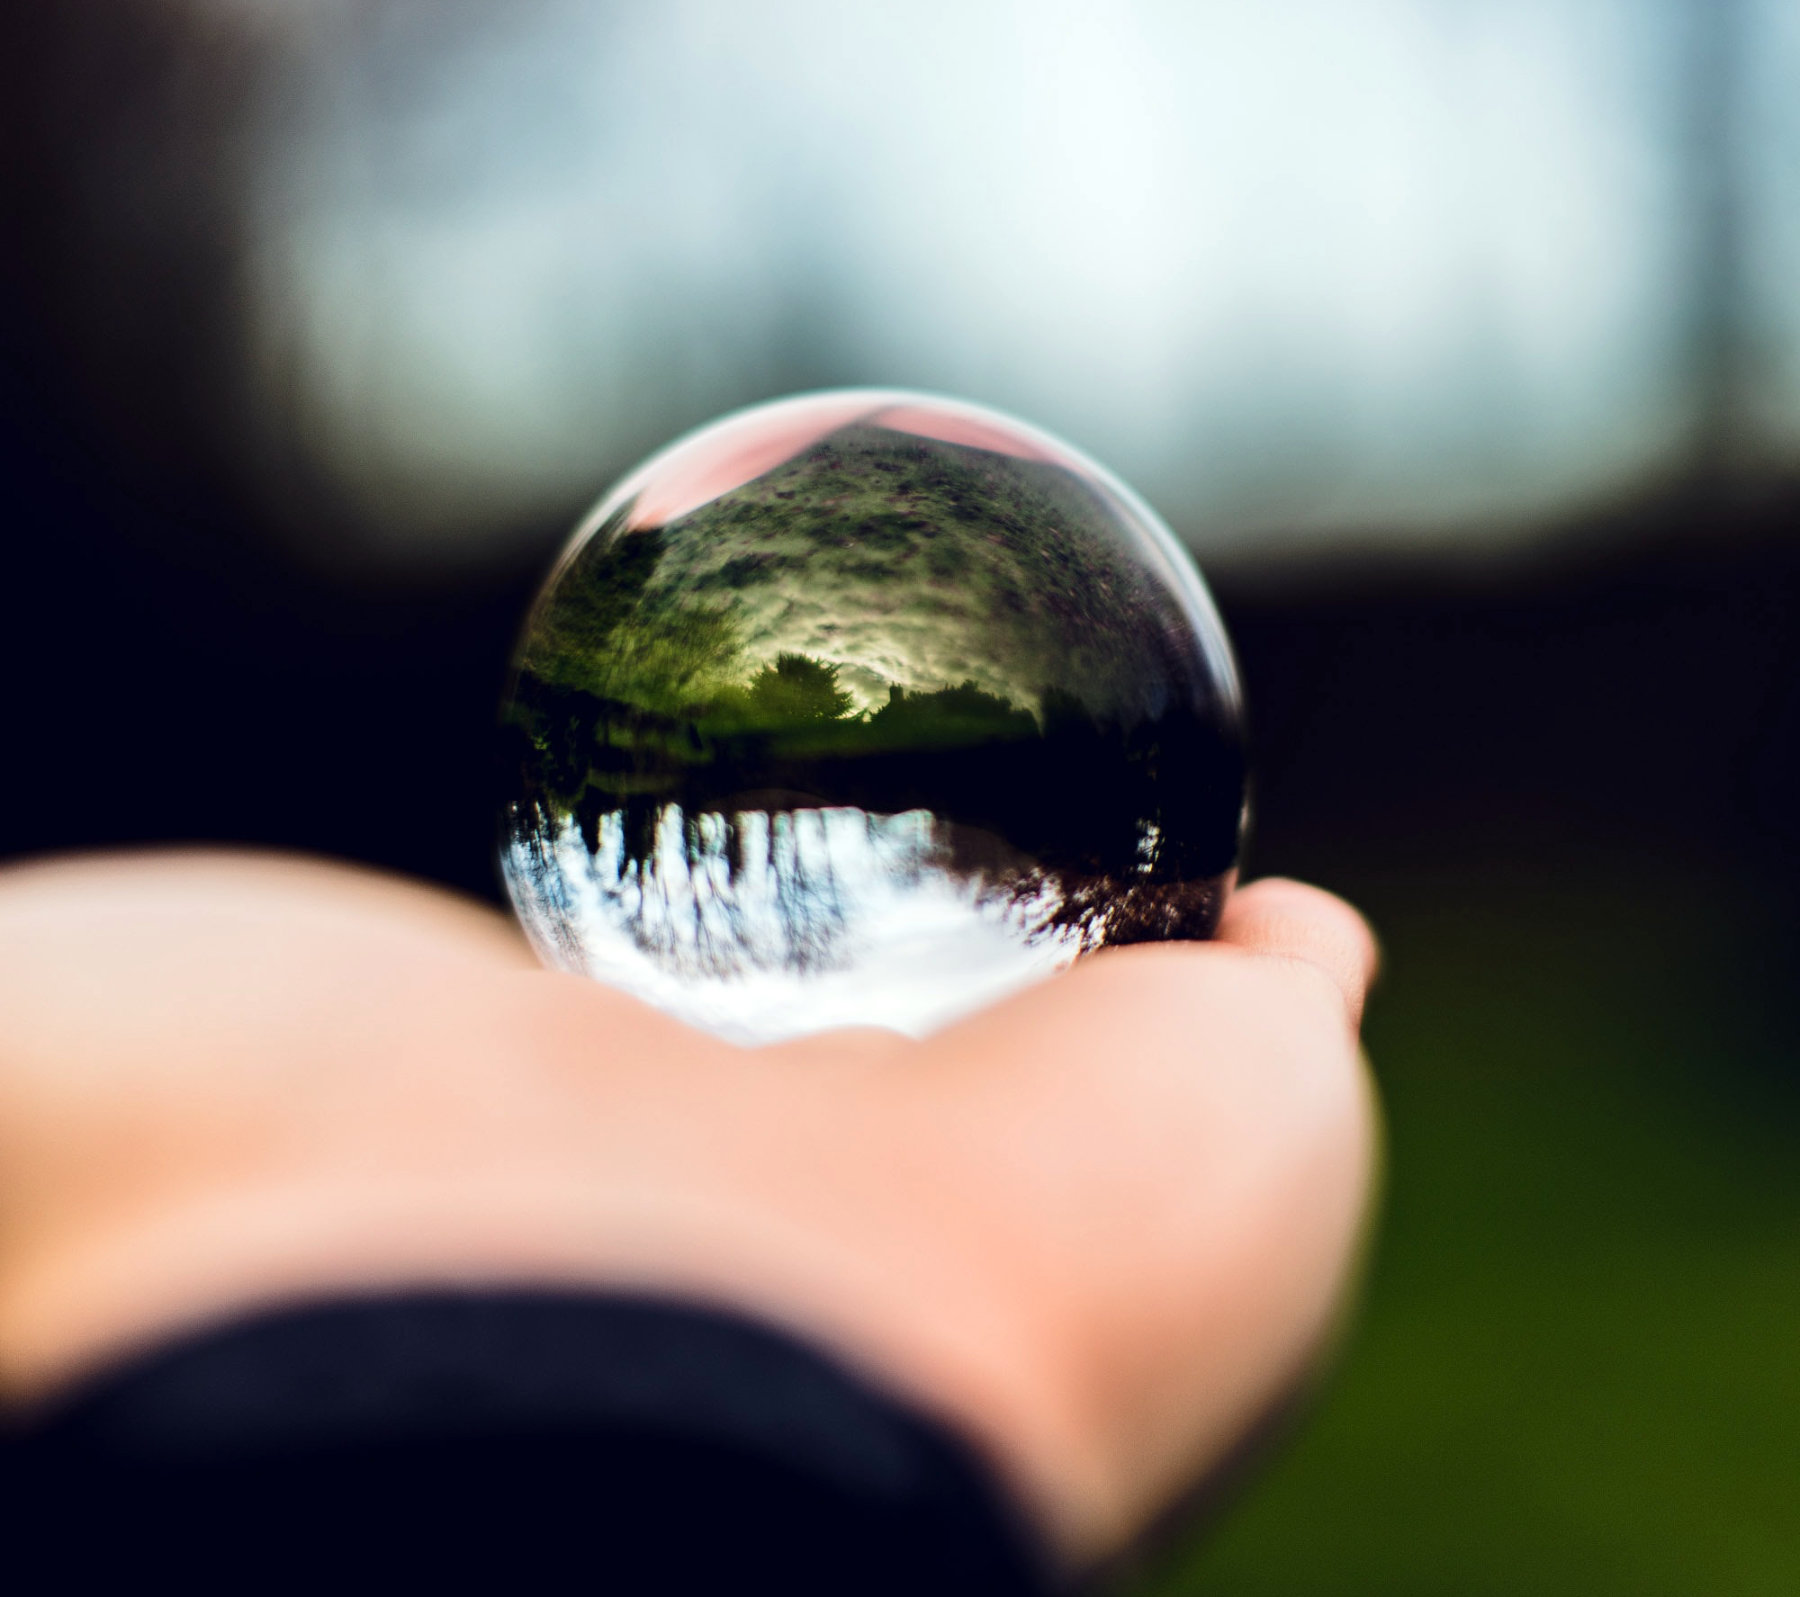 a hand holds a small glass orb reflecting the outside world